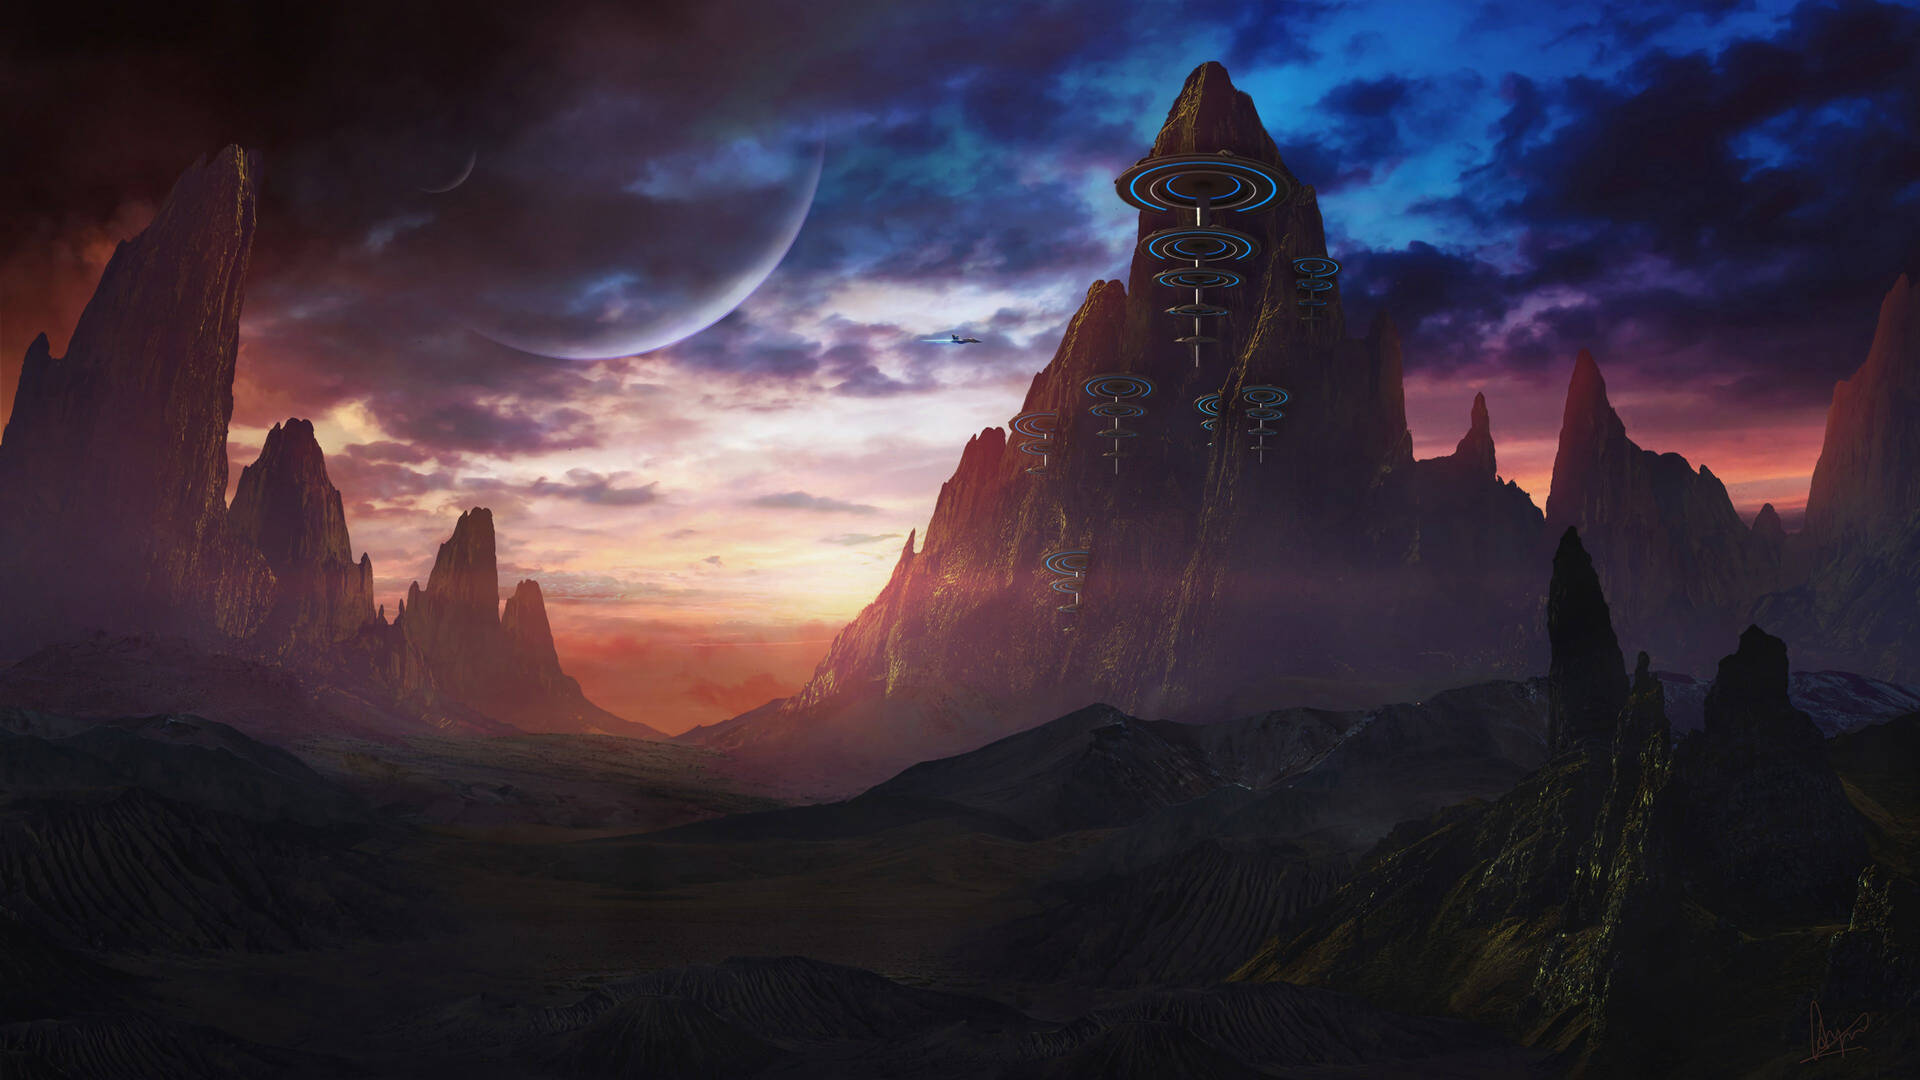 Discover New Realms Of Fantasy In This Mountain Landscape Wallpaper